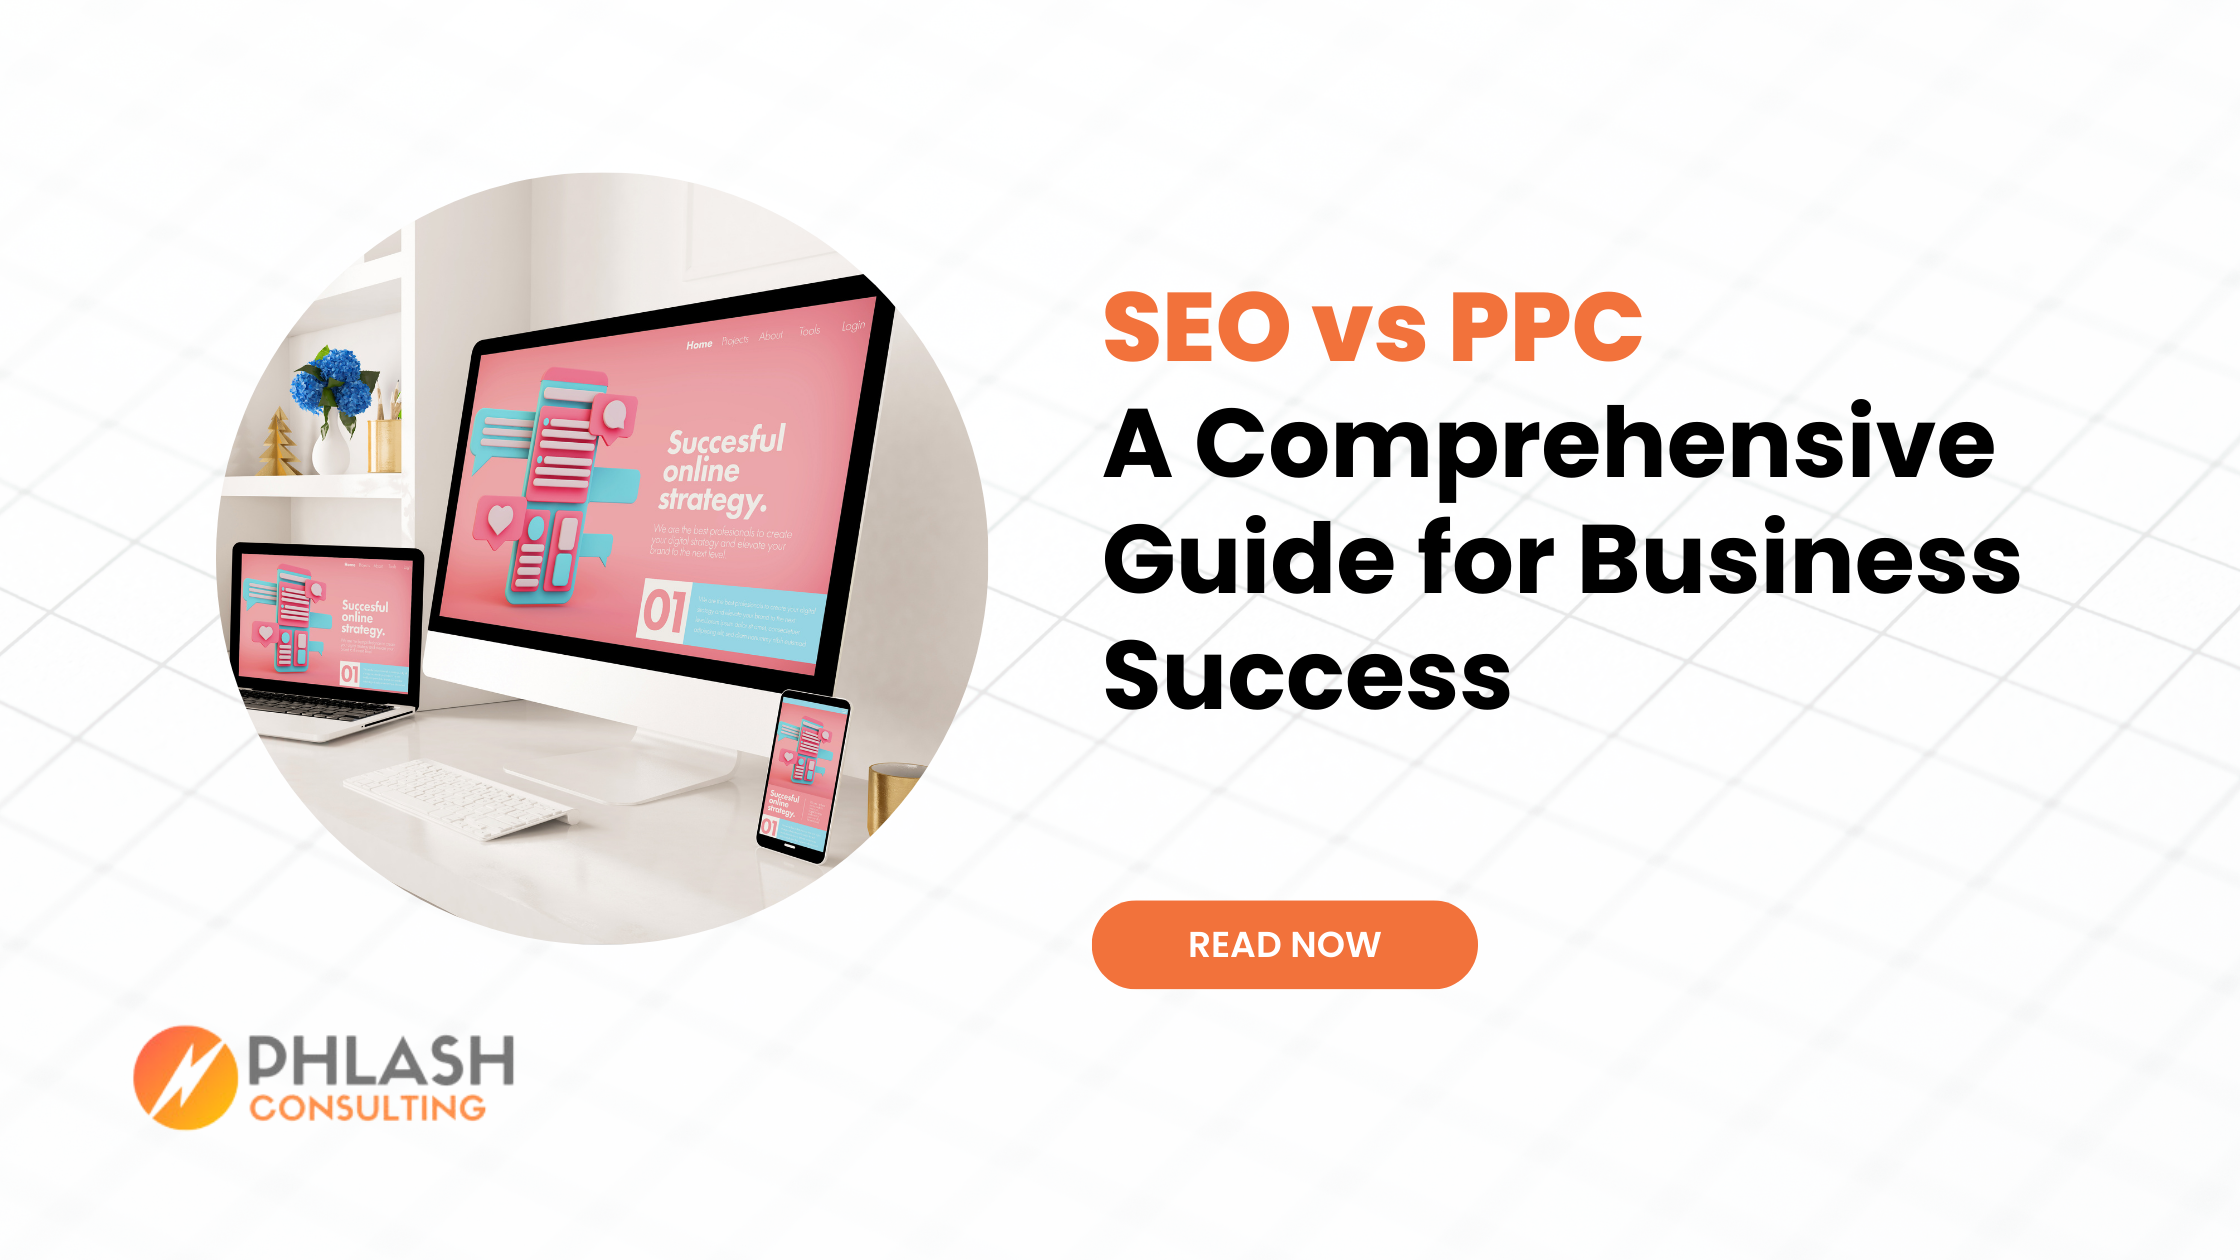 seo vs ppc guide for businesses